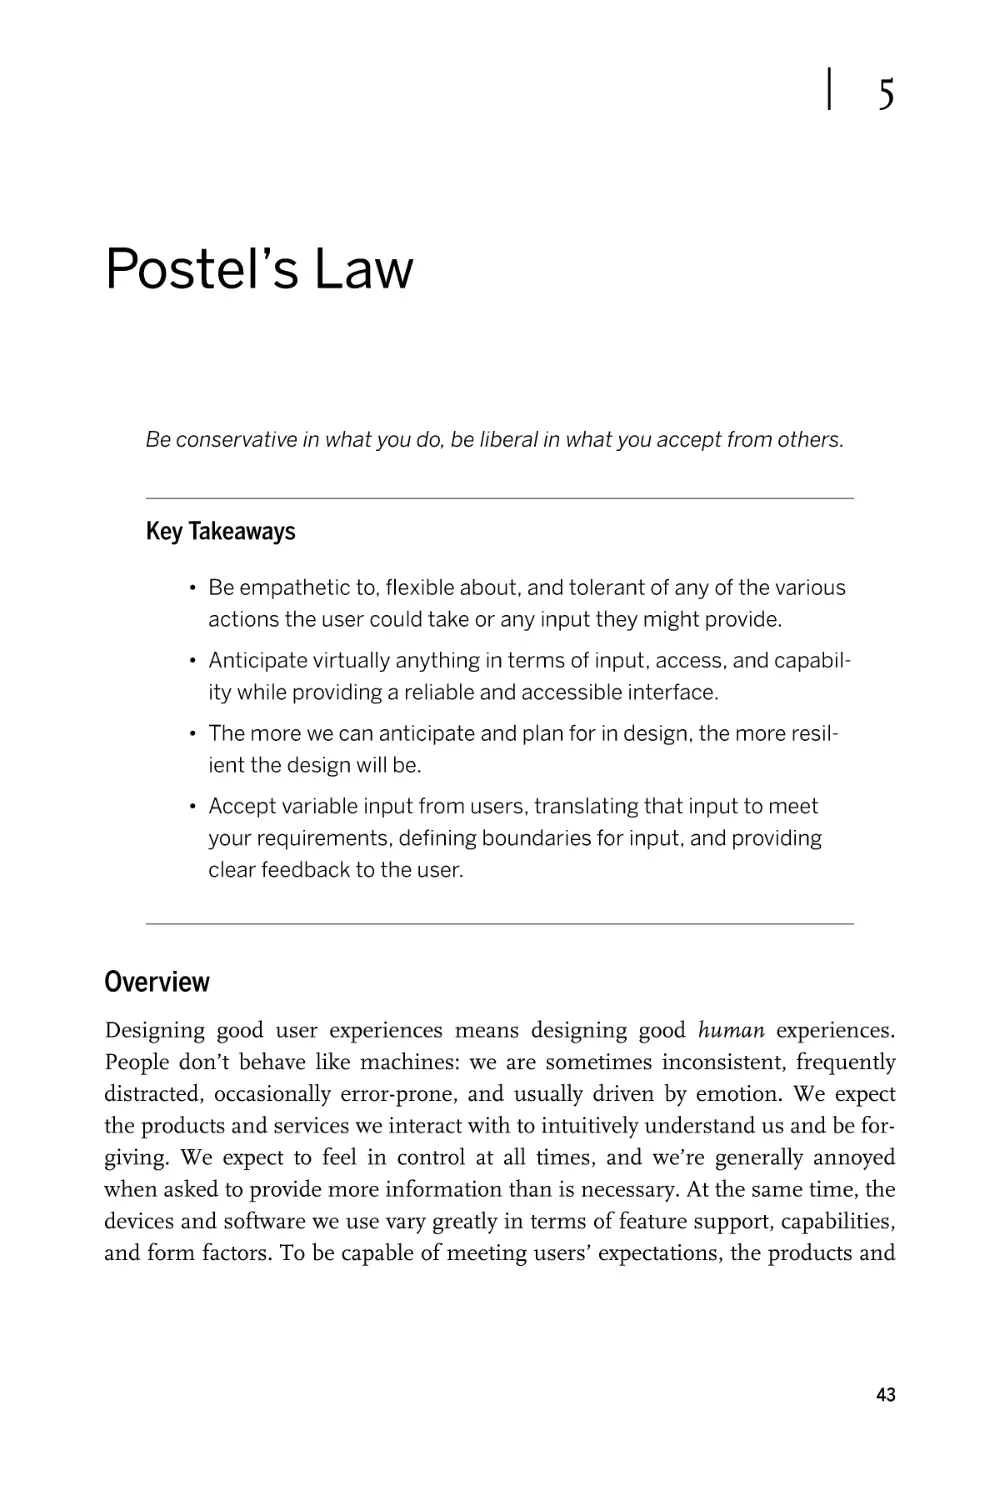 Chapter 5. Postel’s Law
Overview